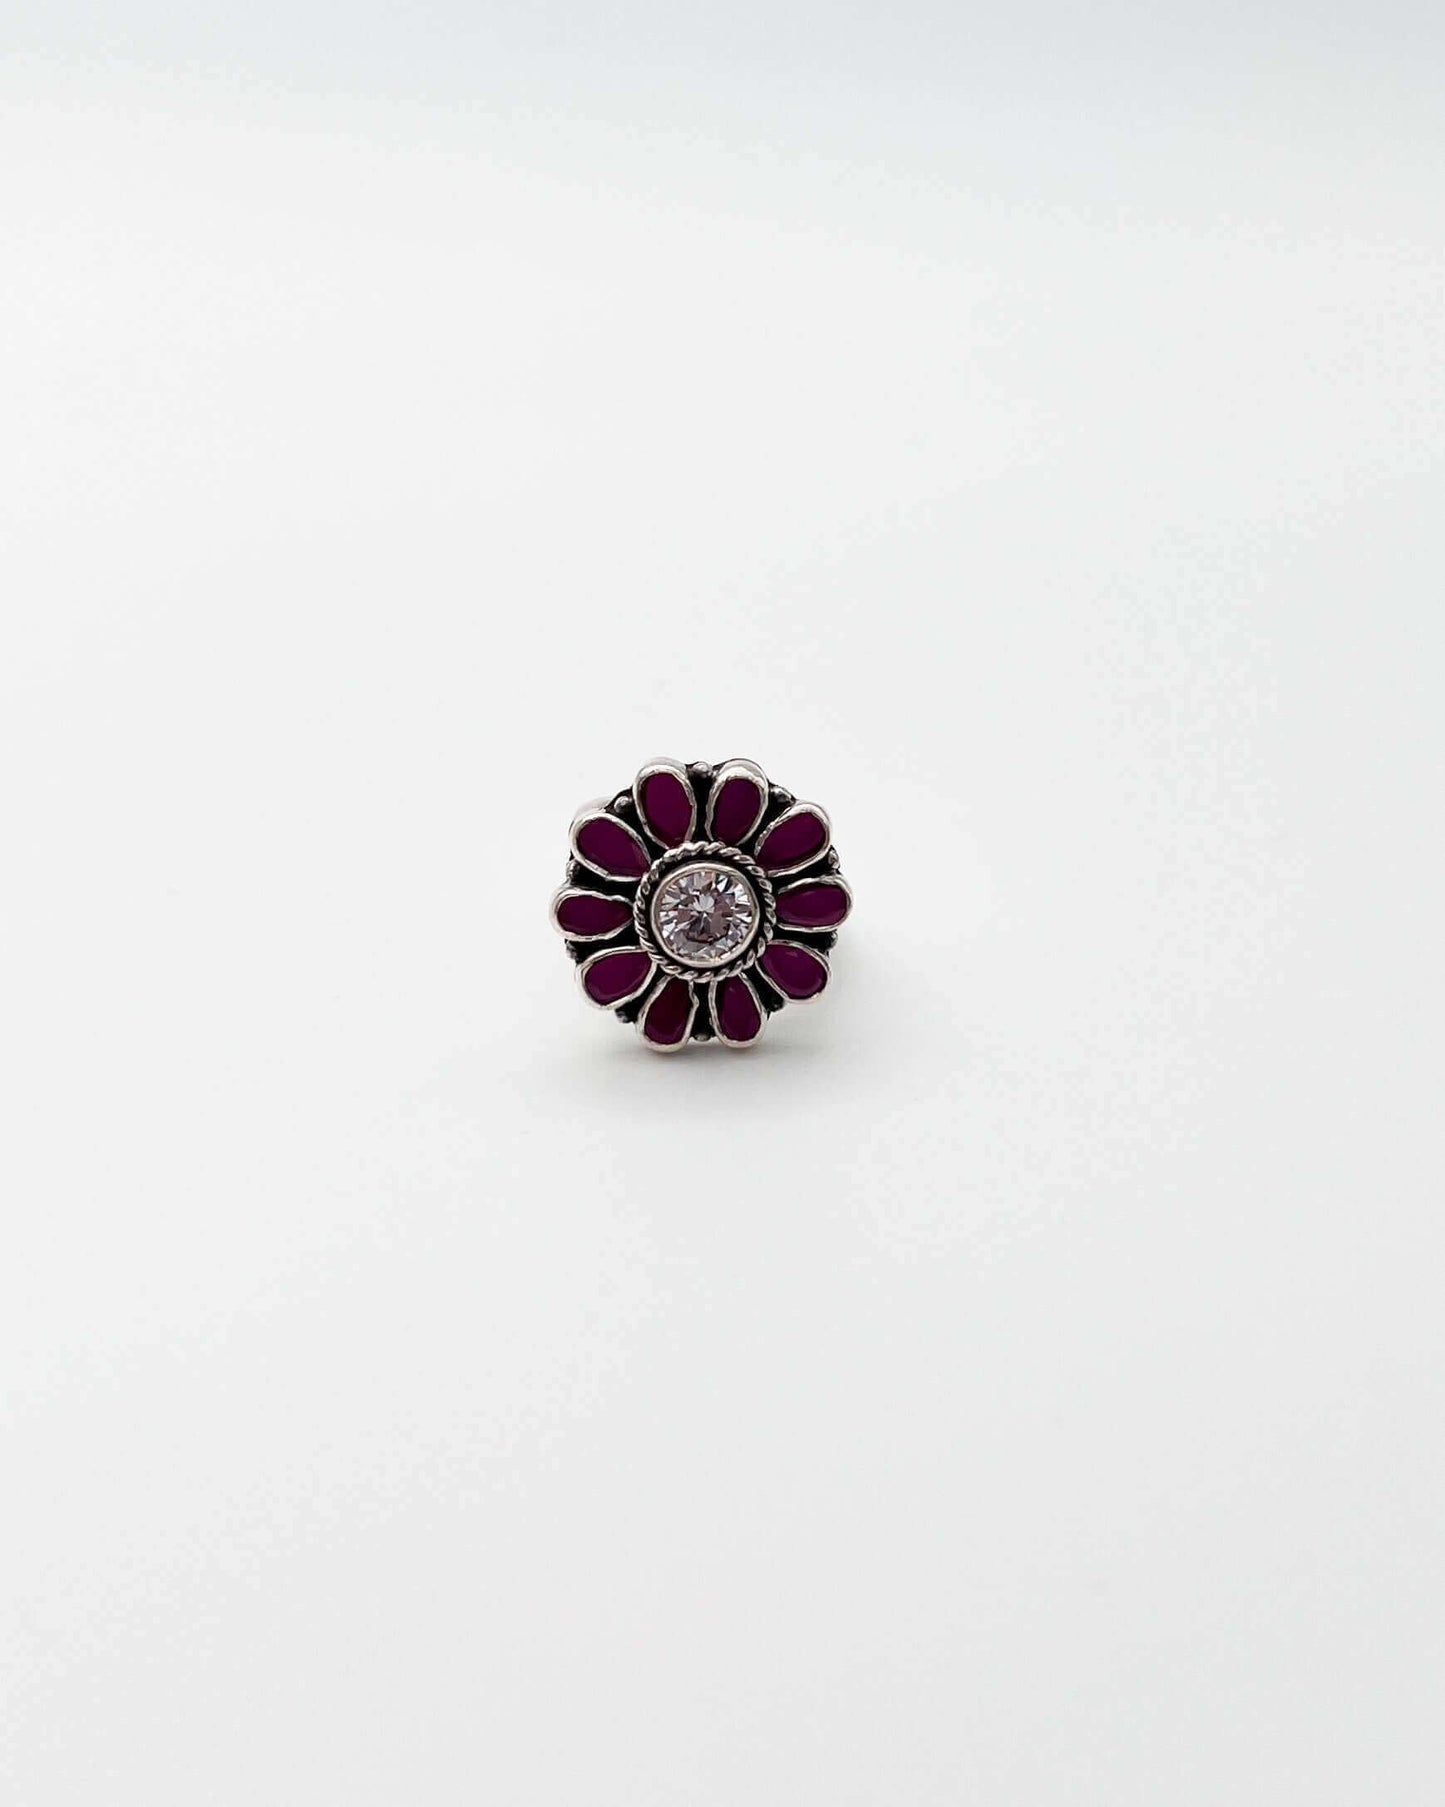 Bakula ring with glass polki and pink glass stone